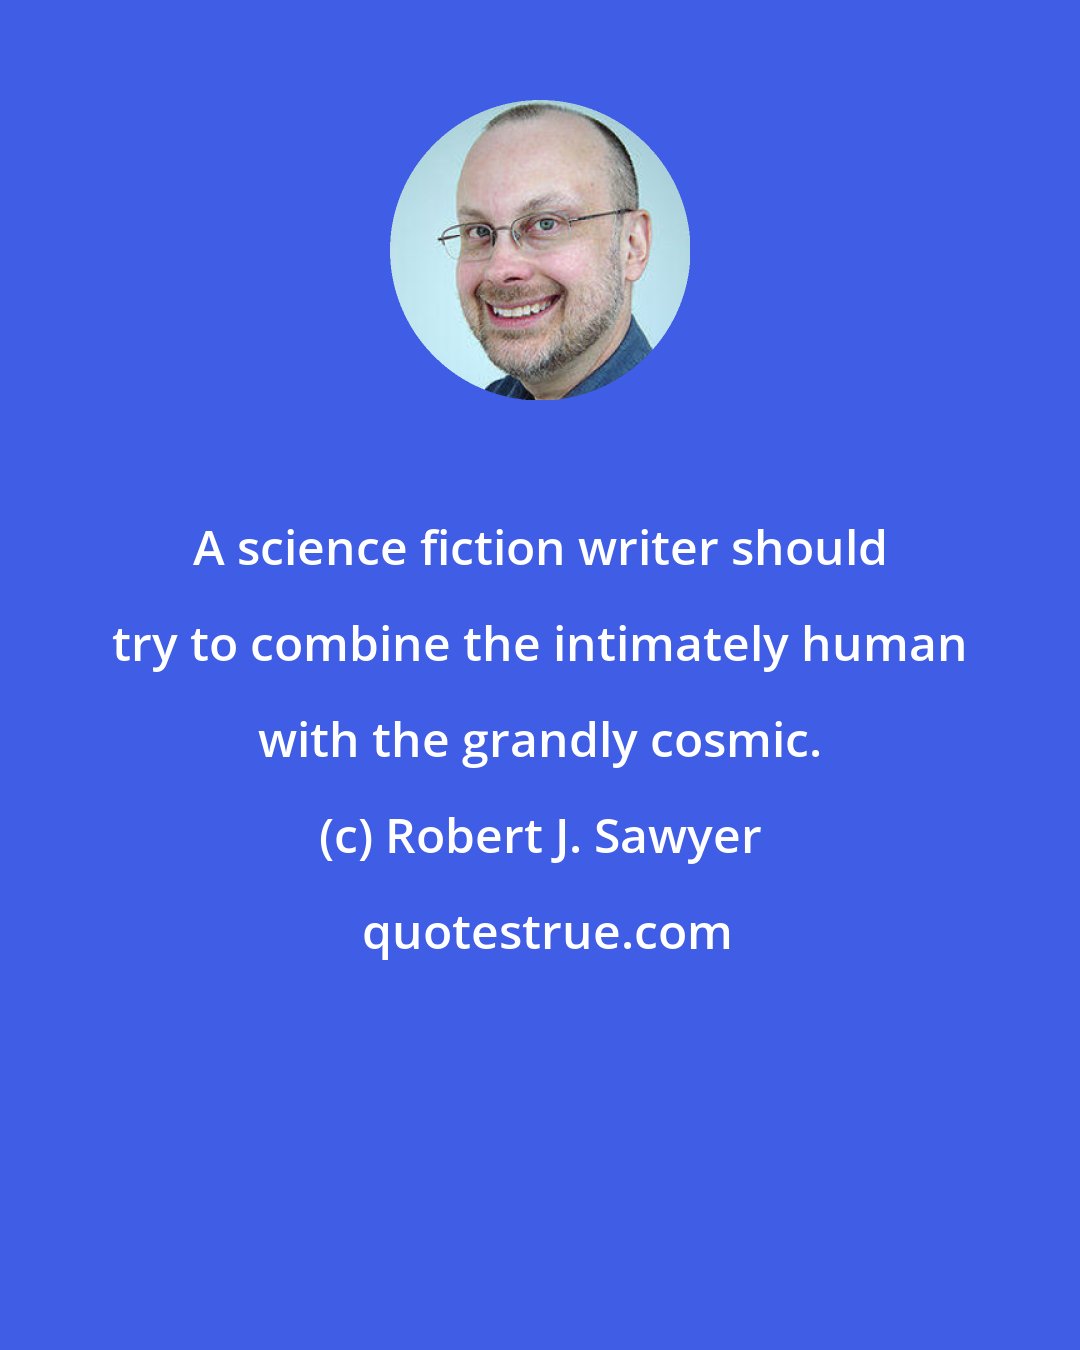 Robert J. Sawyer: A science fiction writer should try to combine the intimately human with the grandly cosmic.